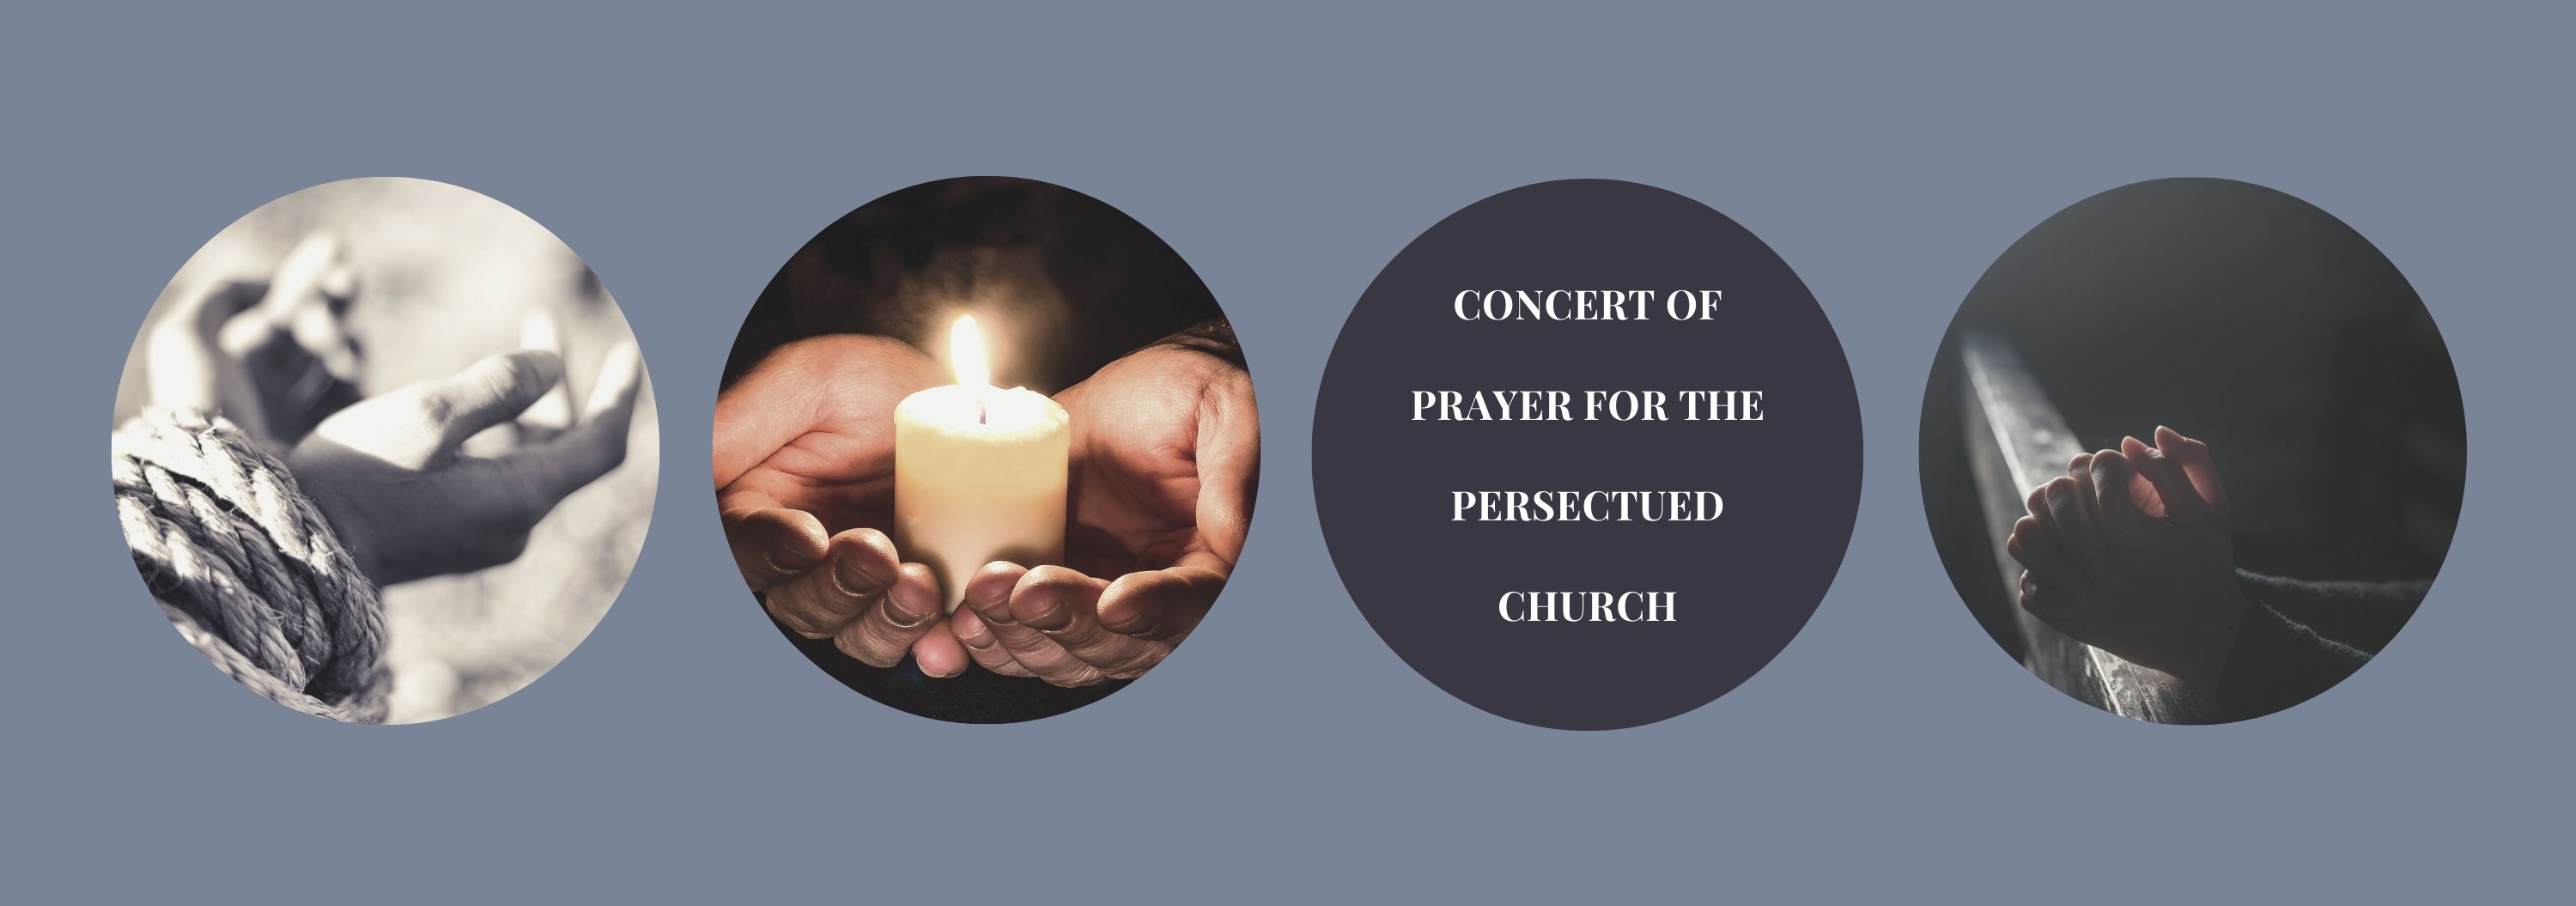 Concert Of Prayer For The Persecuted Church Anglican Diocese Of Pittsburgh